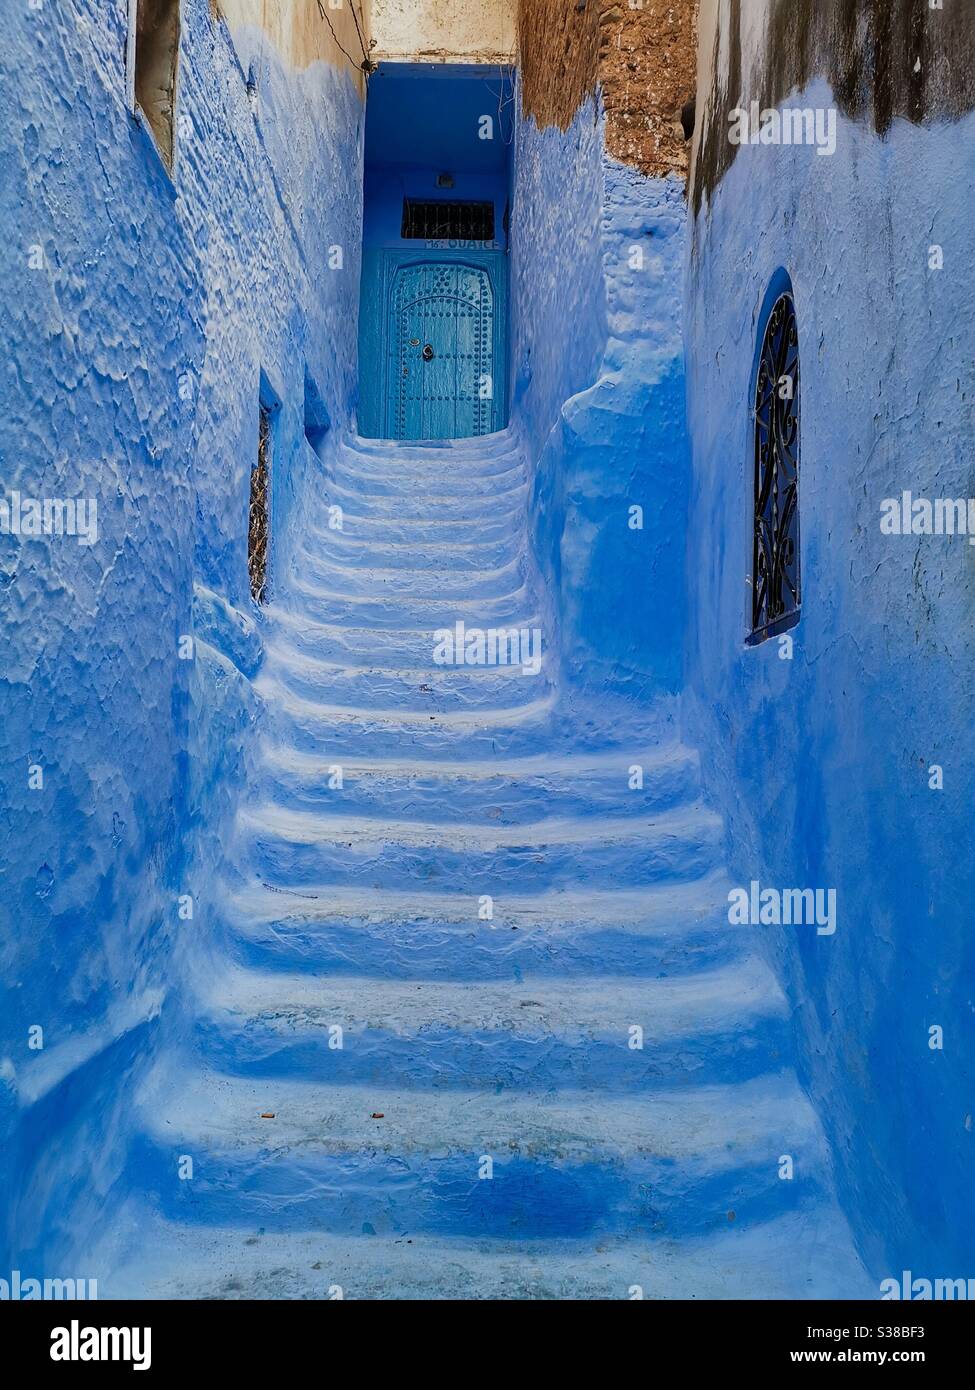 The Blue city of Chefchaouen in Morocco. Stock Photo